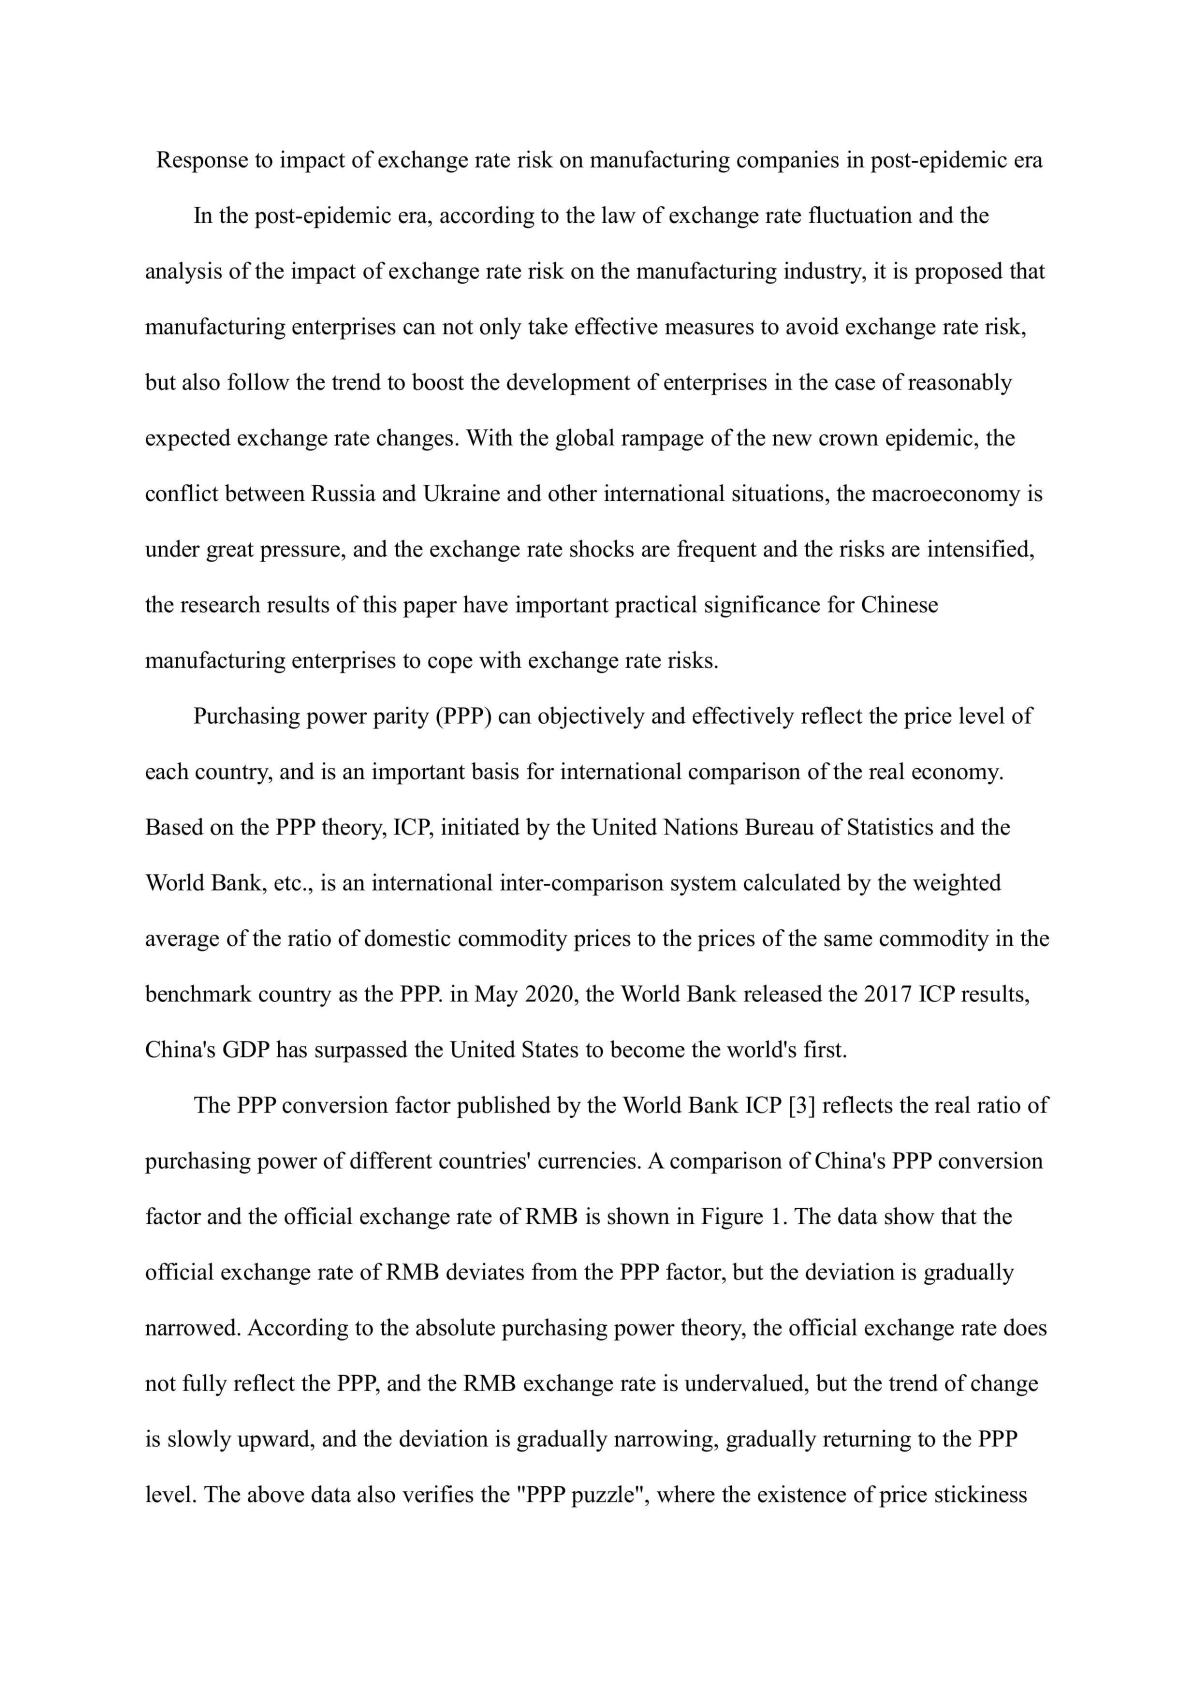 Response to Impact of Exchange Rate Risk on Manufacturing Companies in Post-Epidemic Era - Page 1